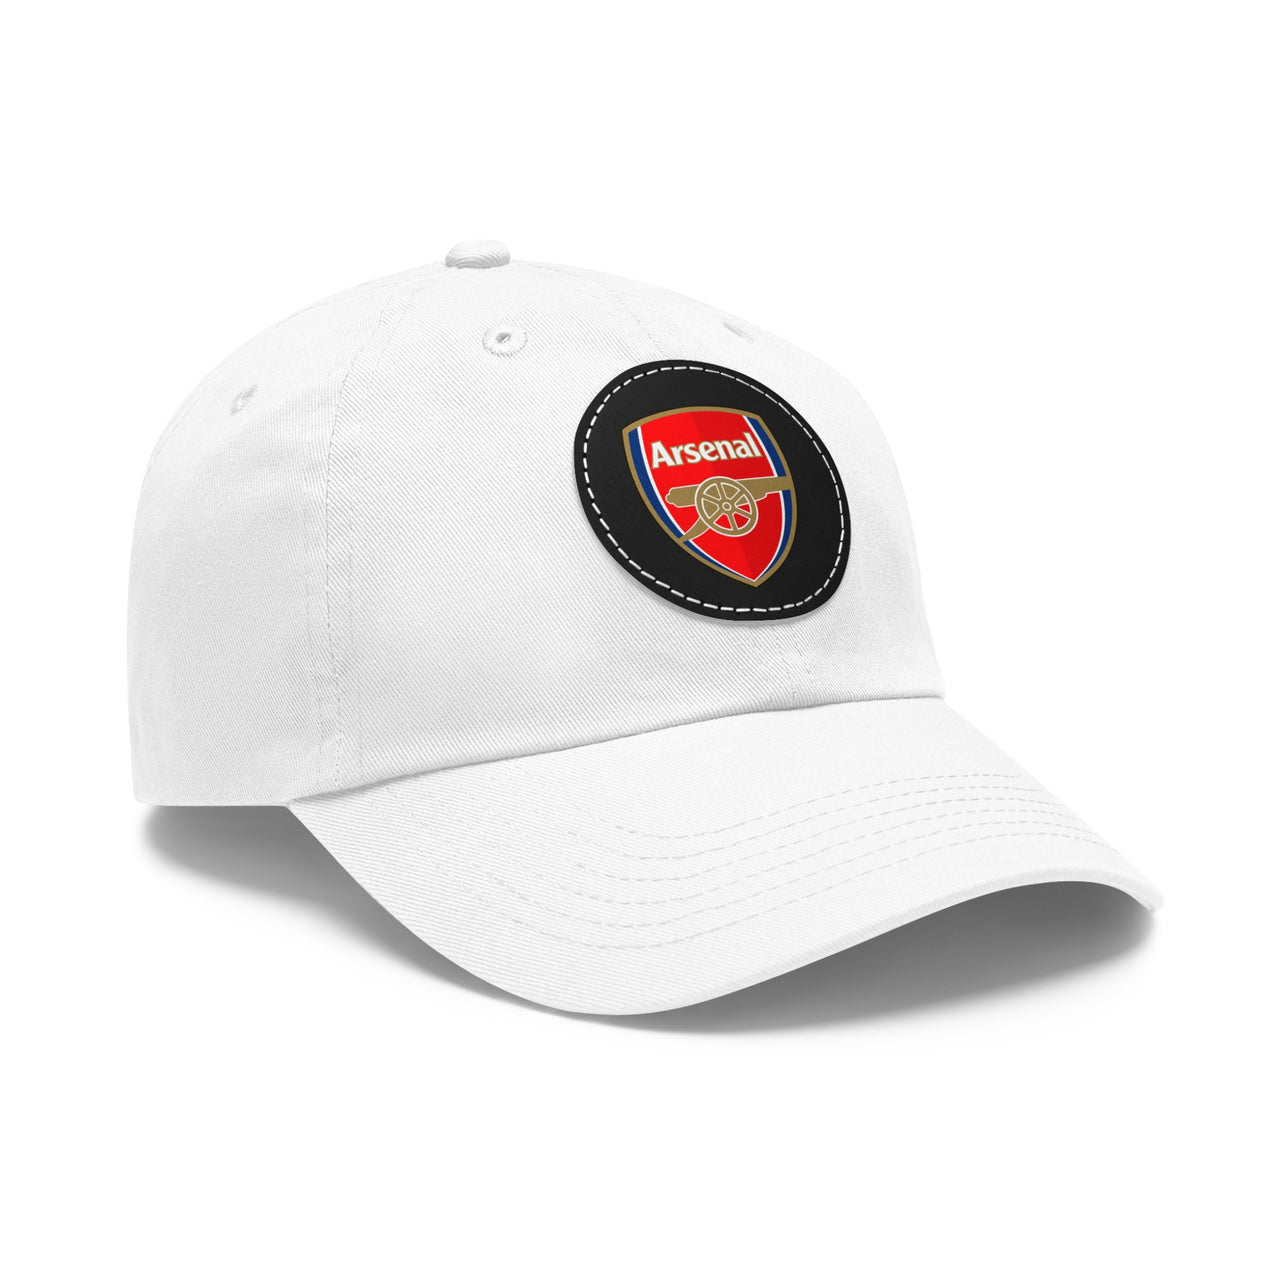 Arsenal Dad Hat with Leather Patch (Round)